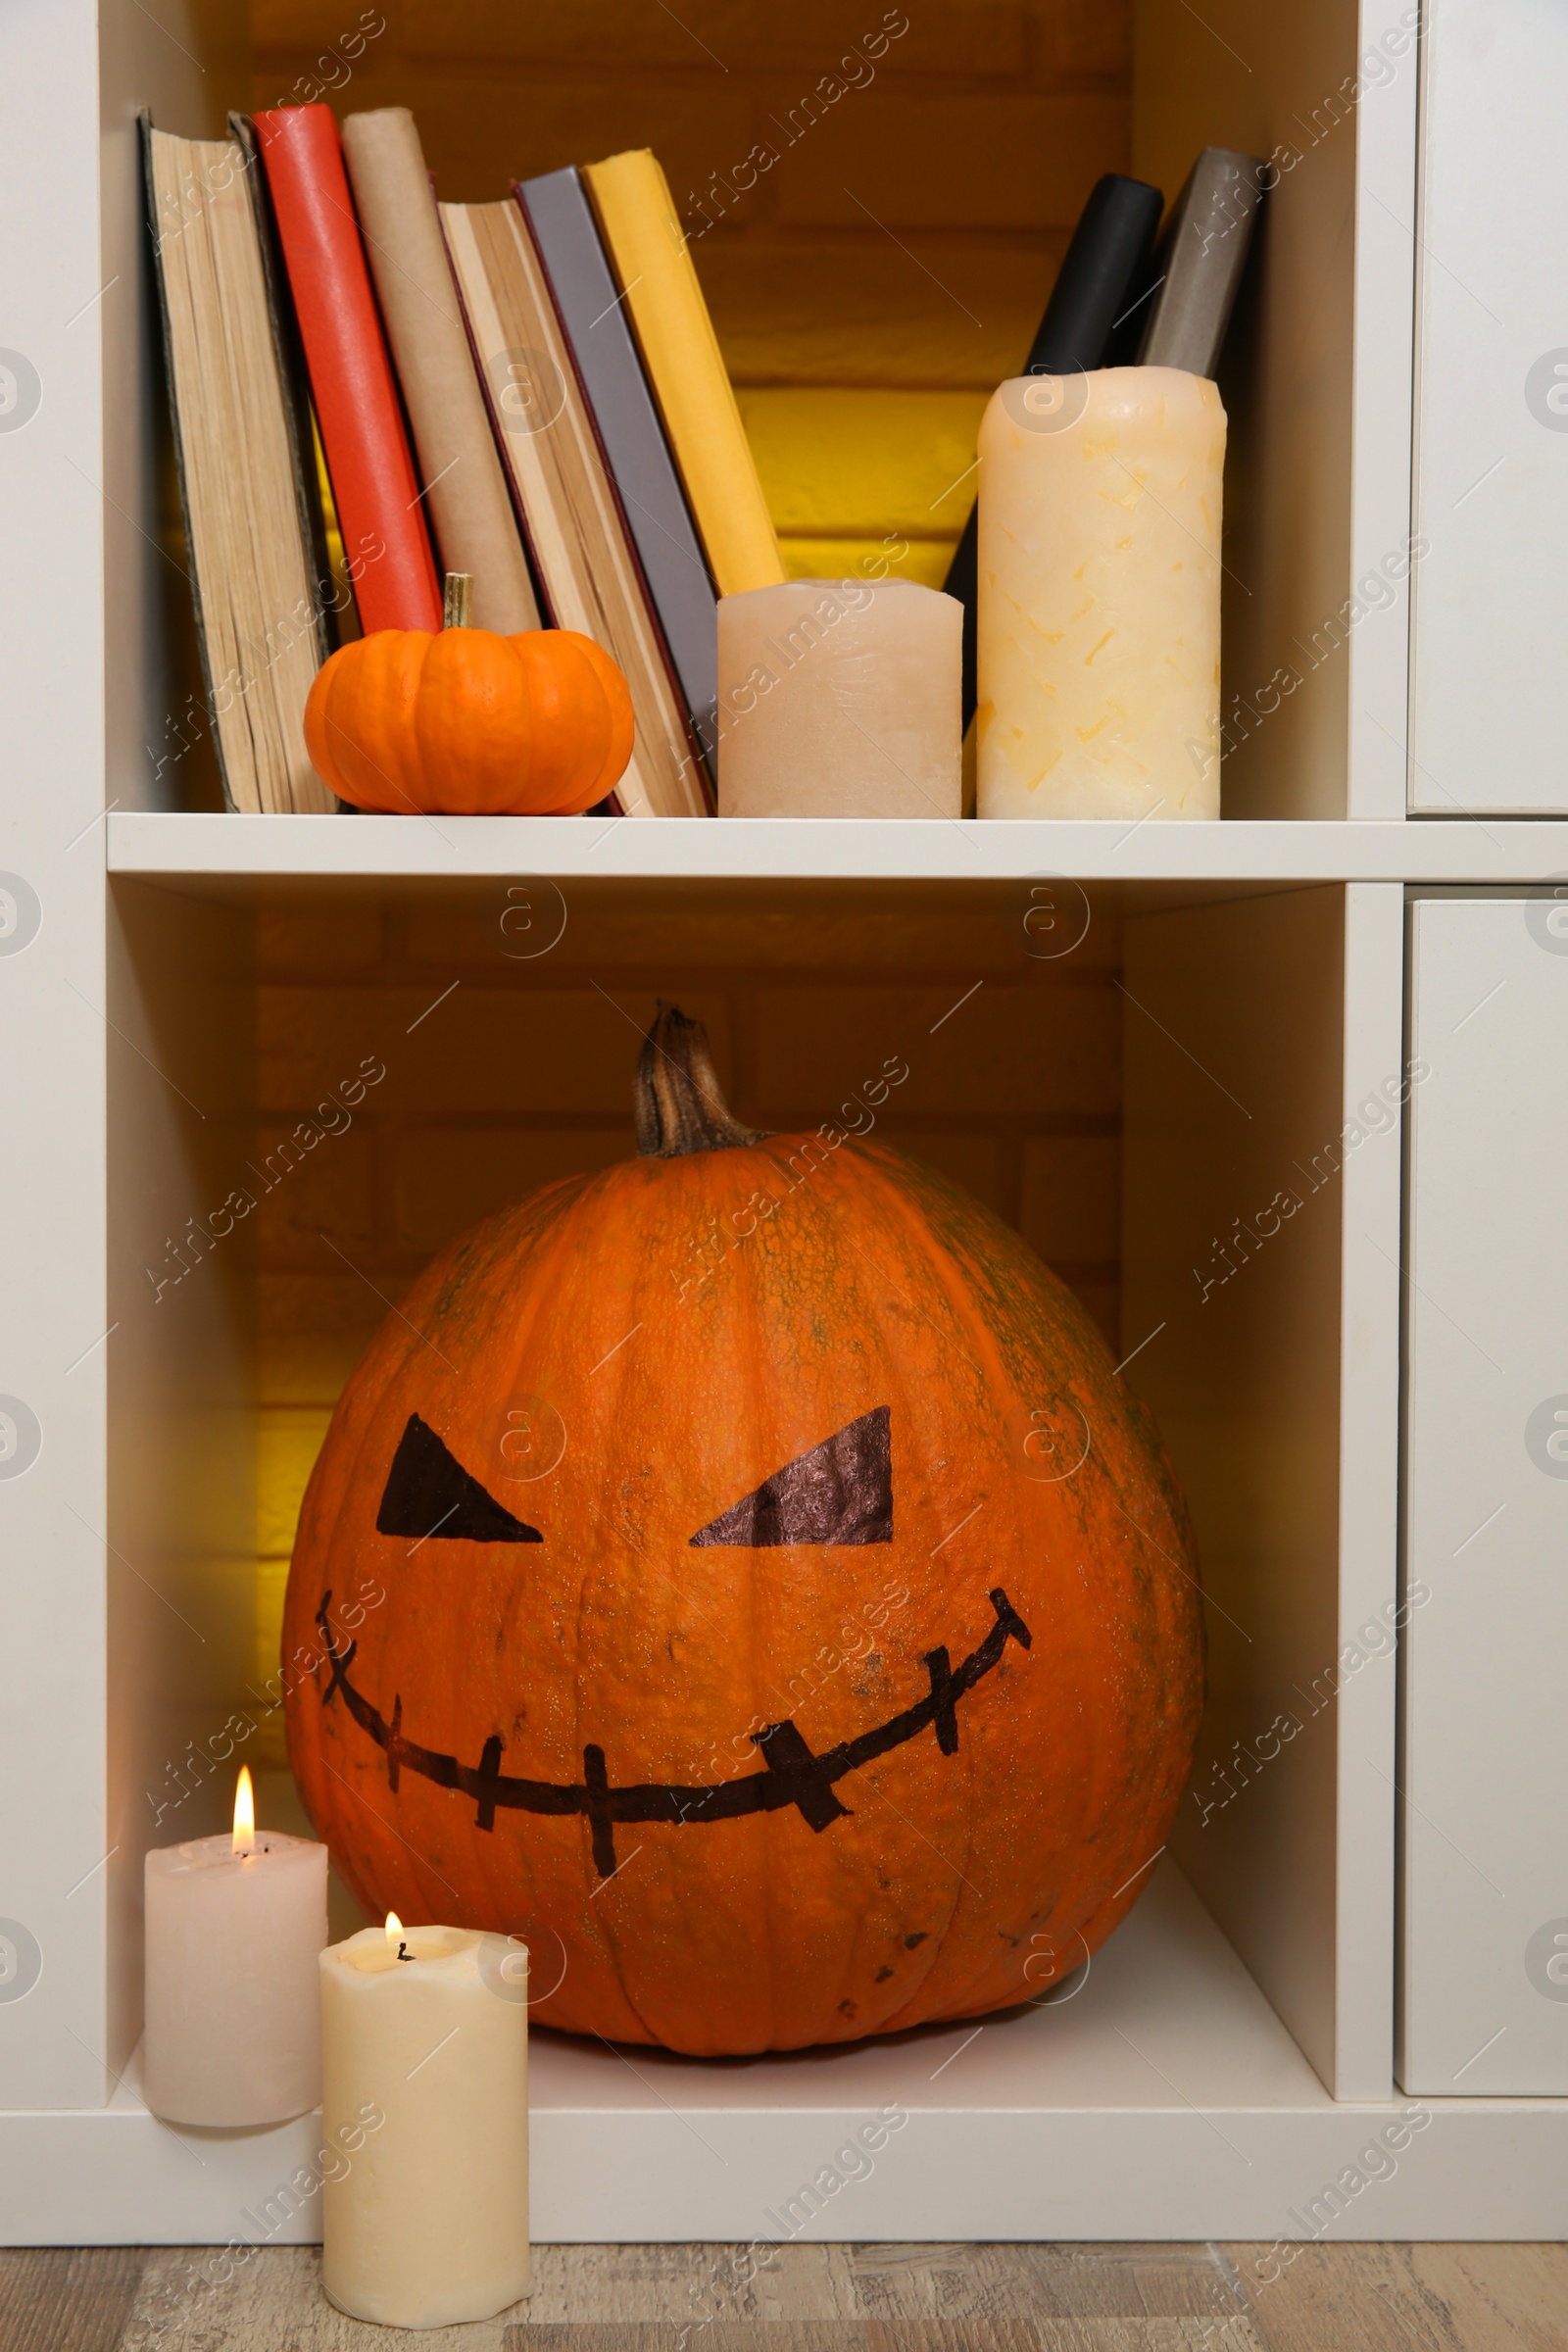 Photo of Pumpkin with drawn spooky face and candles on shelf. Halloween decor